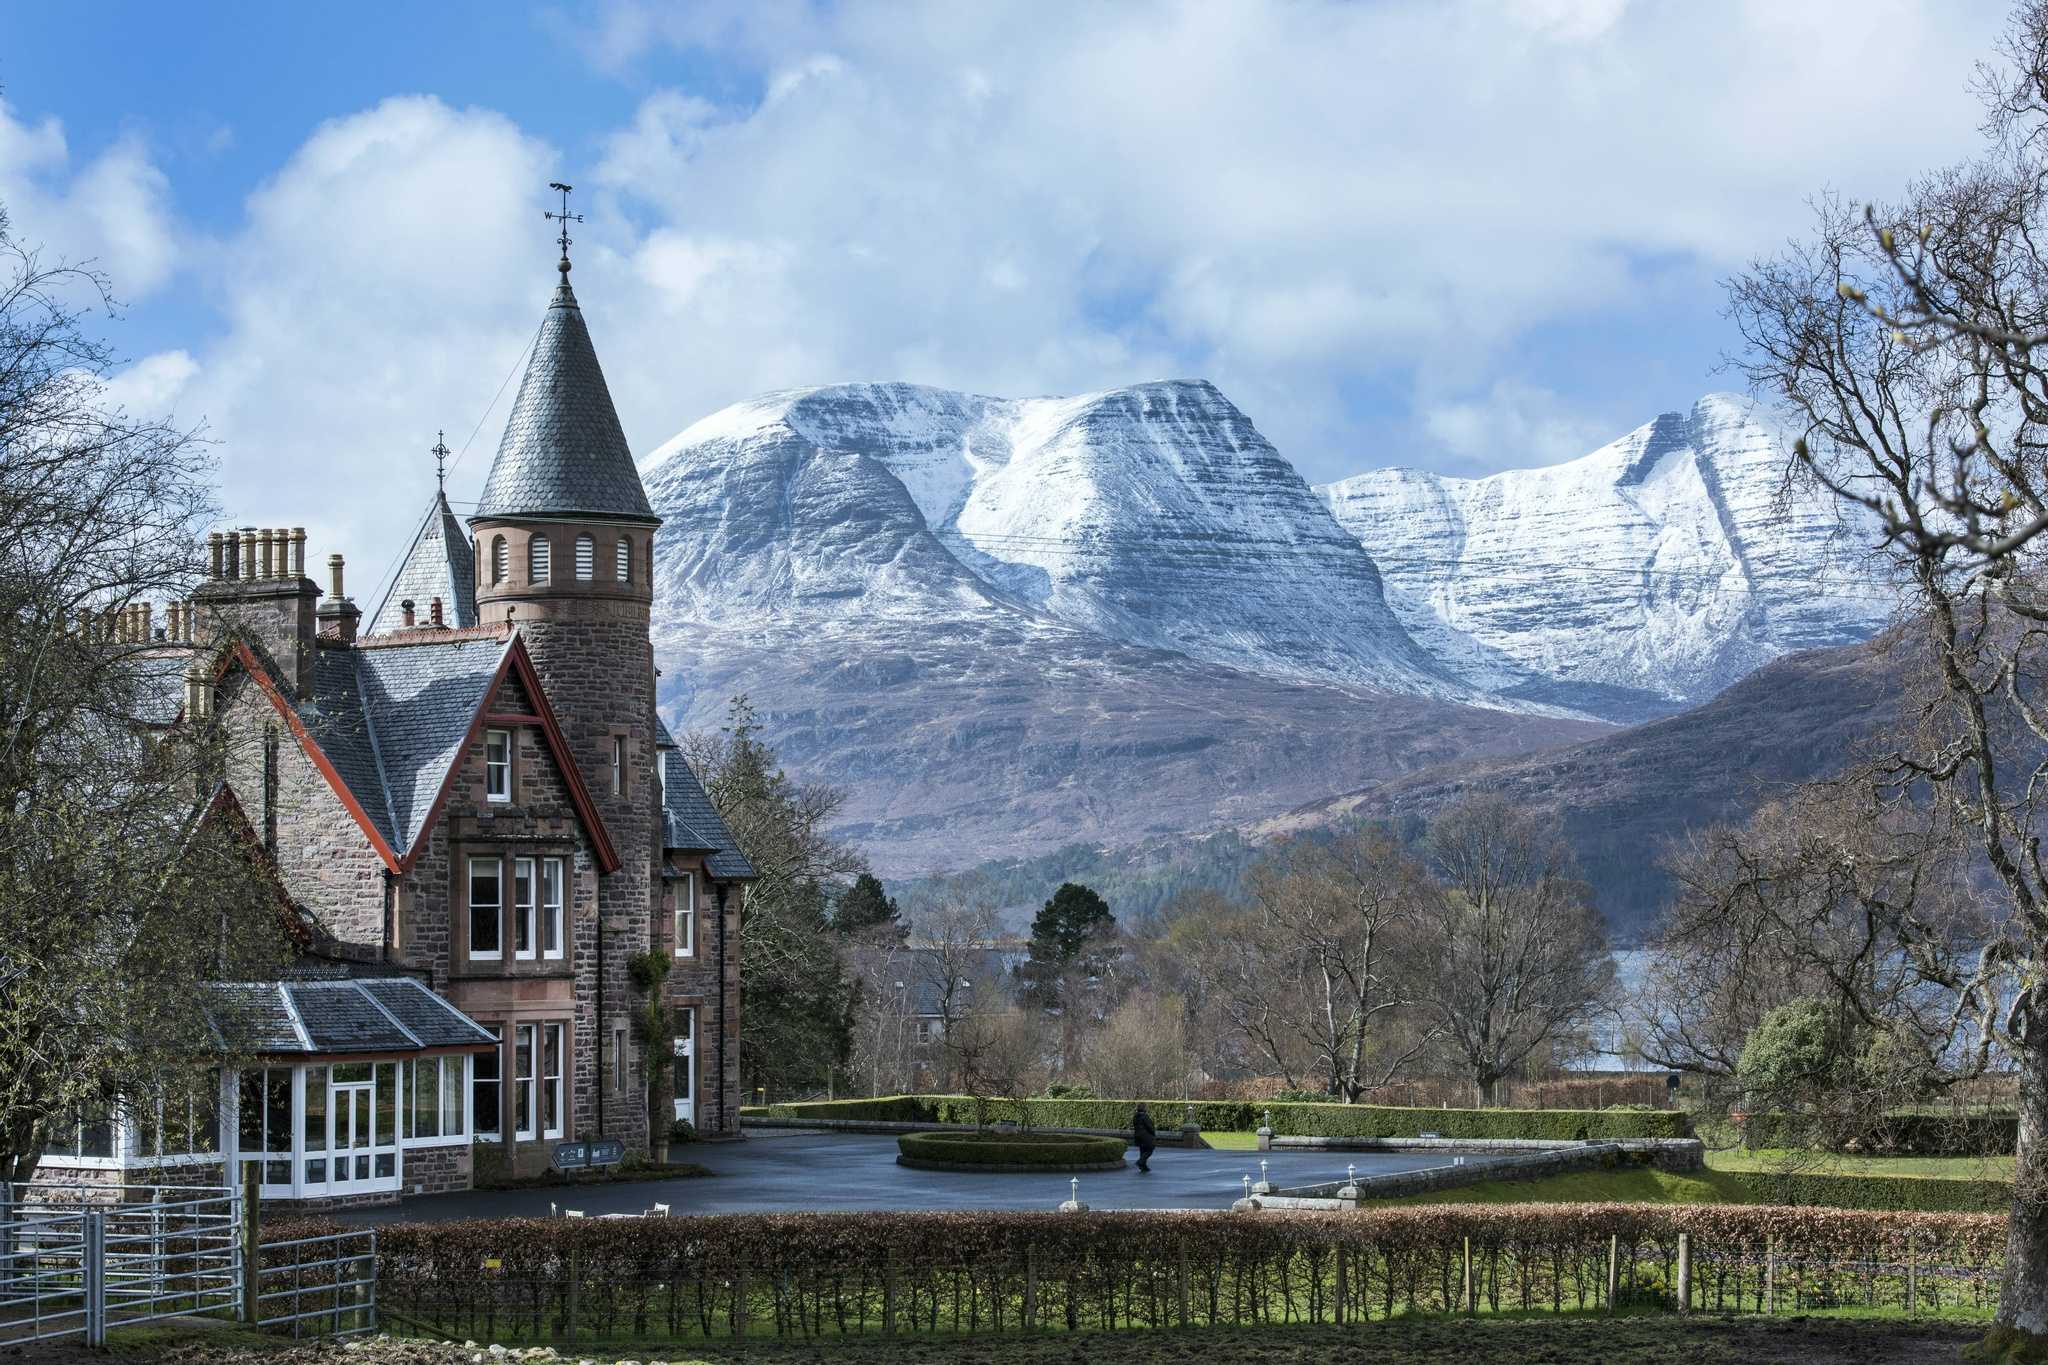 places to visit in scotland winter